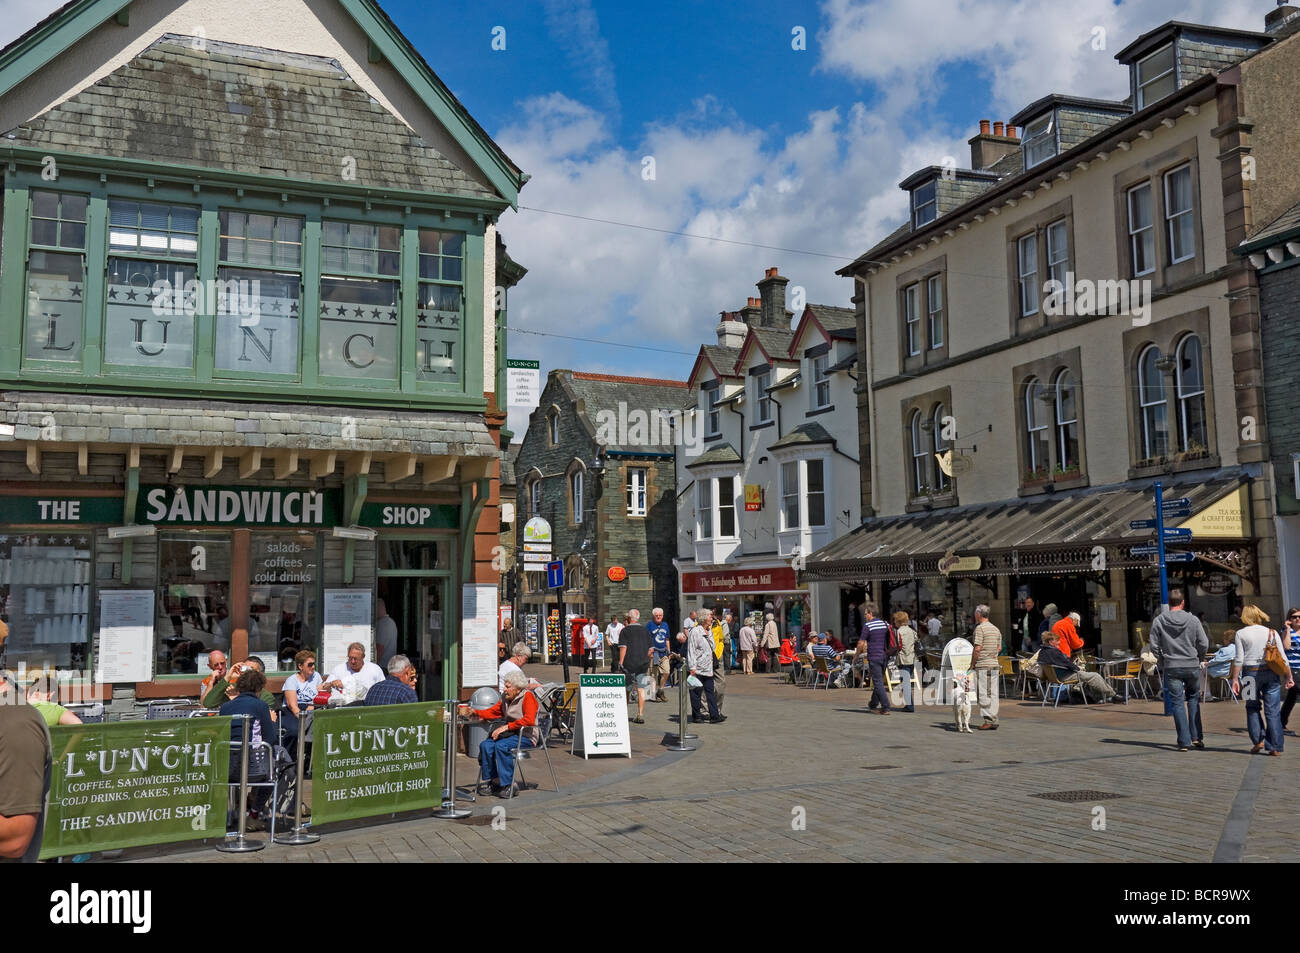 People tourists visitors in Market place in summer Keswick Cumbria England UK United Kingdom GB Great Britain Stock Photo